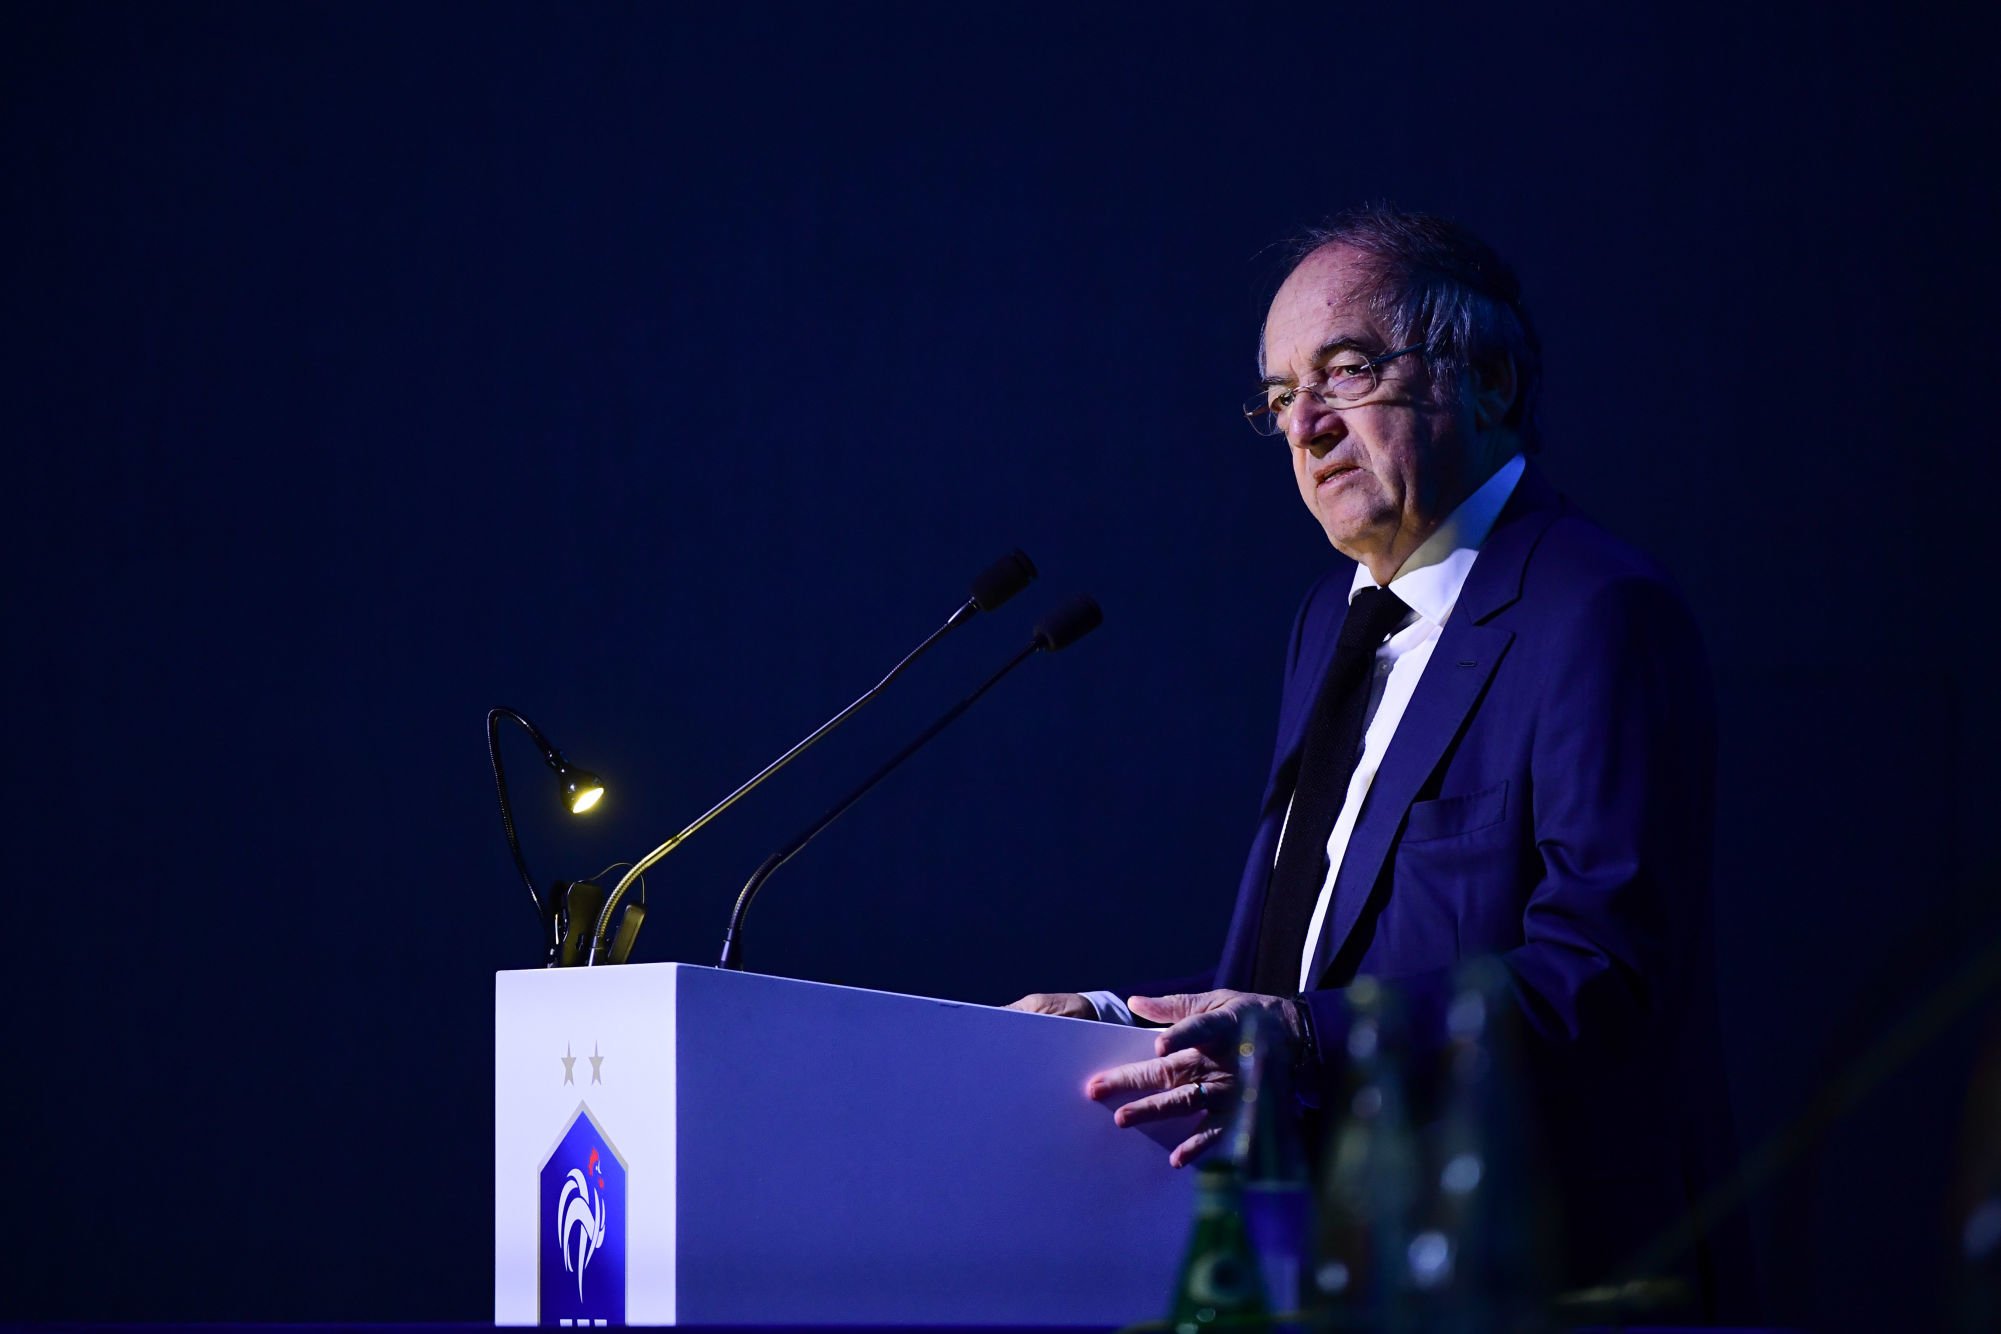 President of the French football federation (FFF) executive commitee Noel LE GRAET during the Federal Assembly of the French Football Federation on December 14, 2019 in Paris, France. (Photo by Dave Winter/Icon Sport) - Noel Le GRAET - Hotel Marriott rive gauche hotel - Paris (France)